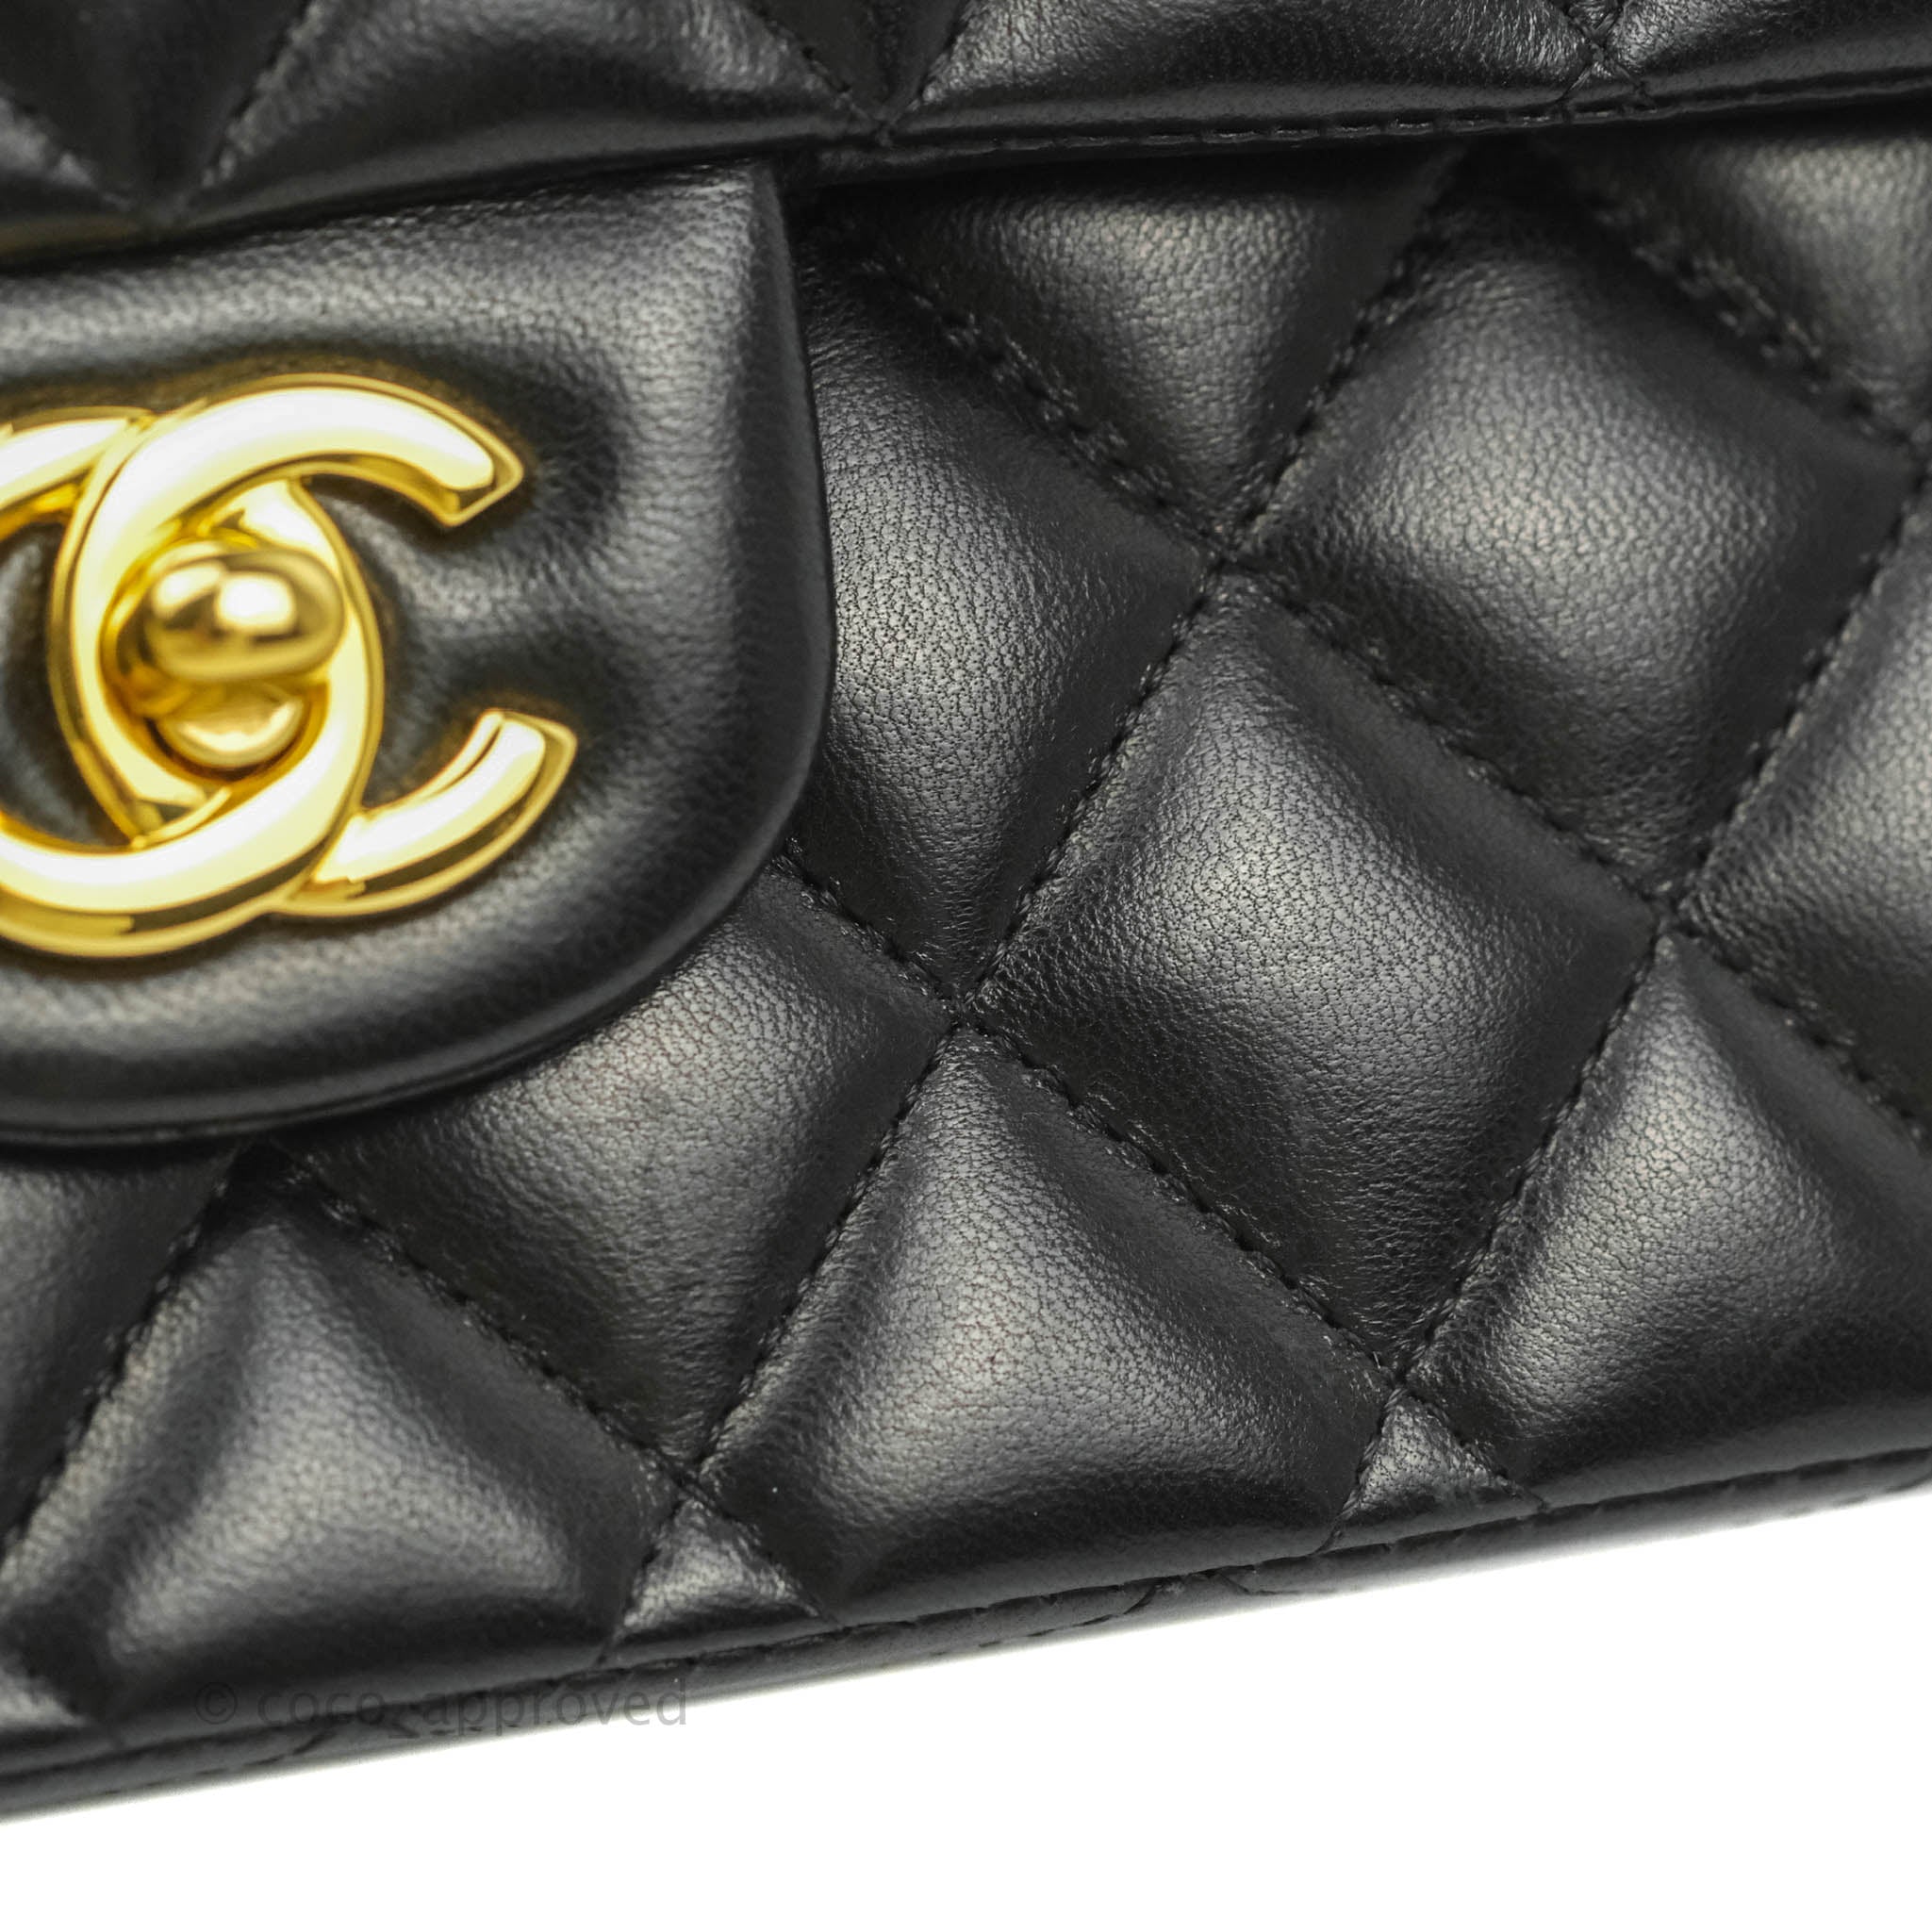 Chanel Quilted Chain Around Clutch Black Lambskin Gold Hardware – Coco  Approved Studio